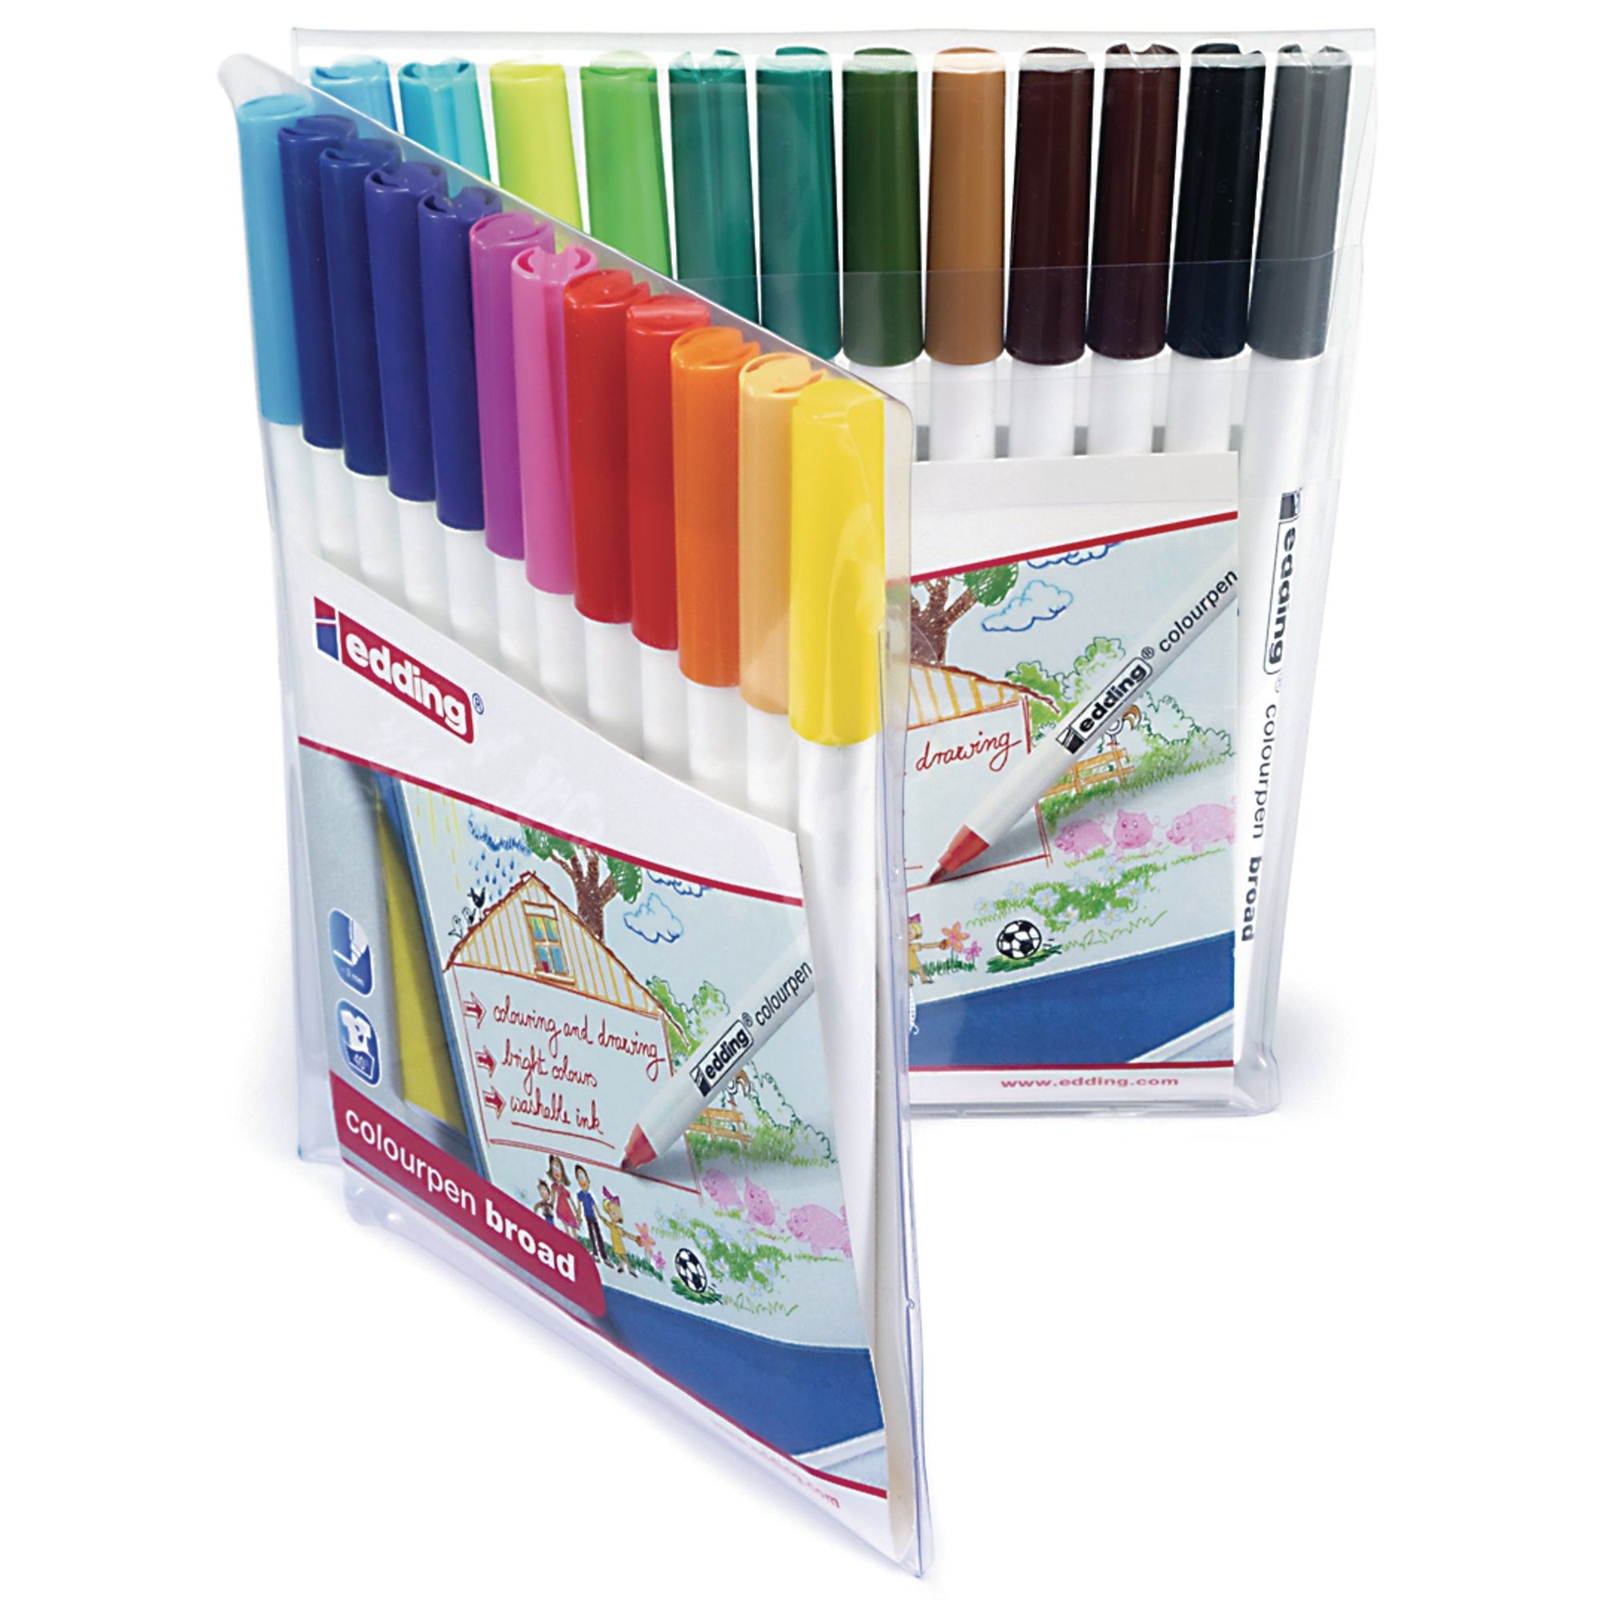 Edding Colourpen Broad - Assorted - Pack of 24